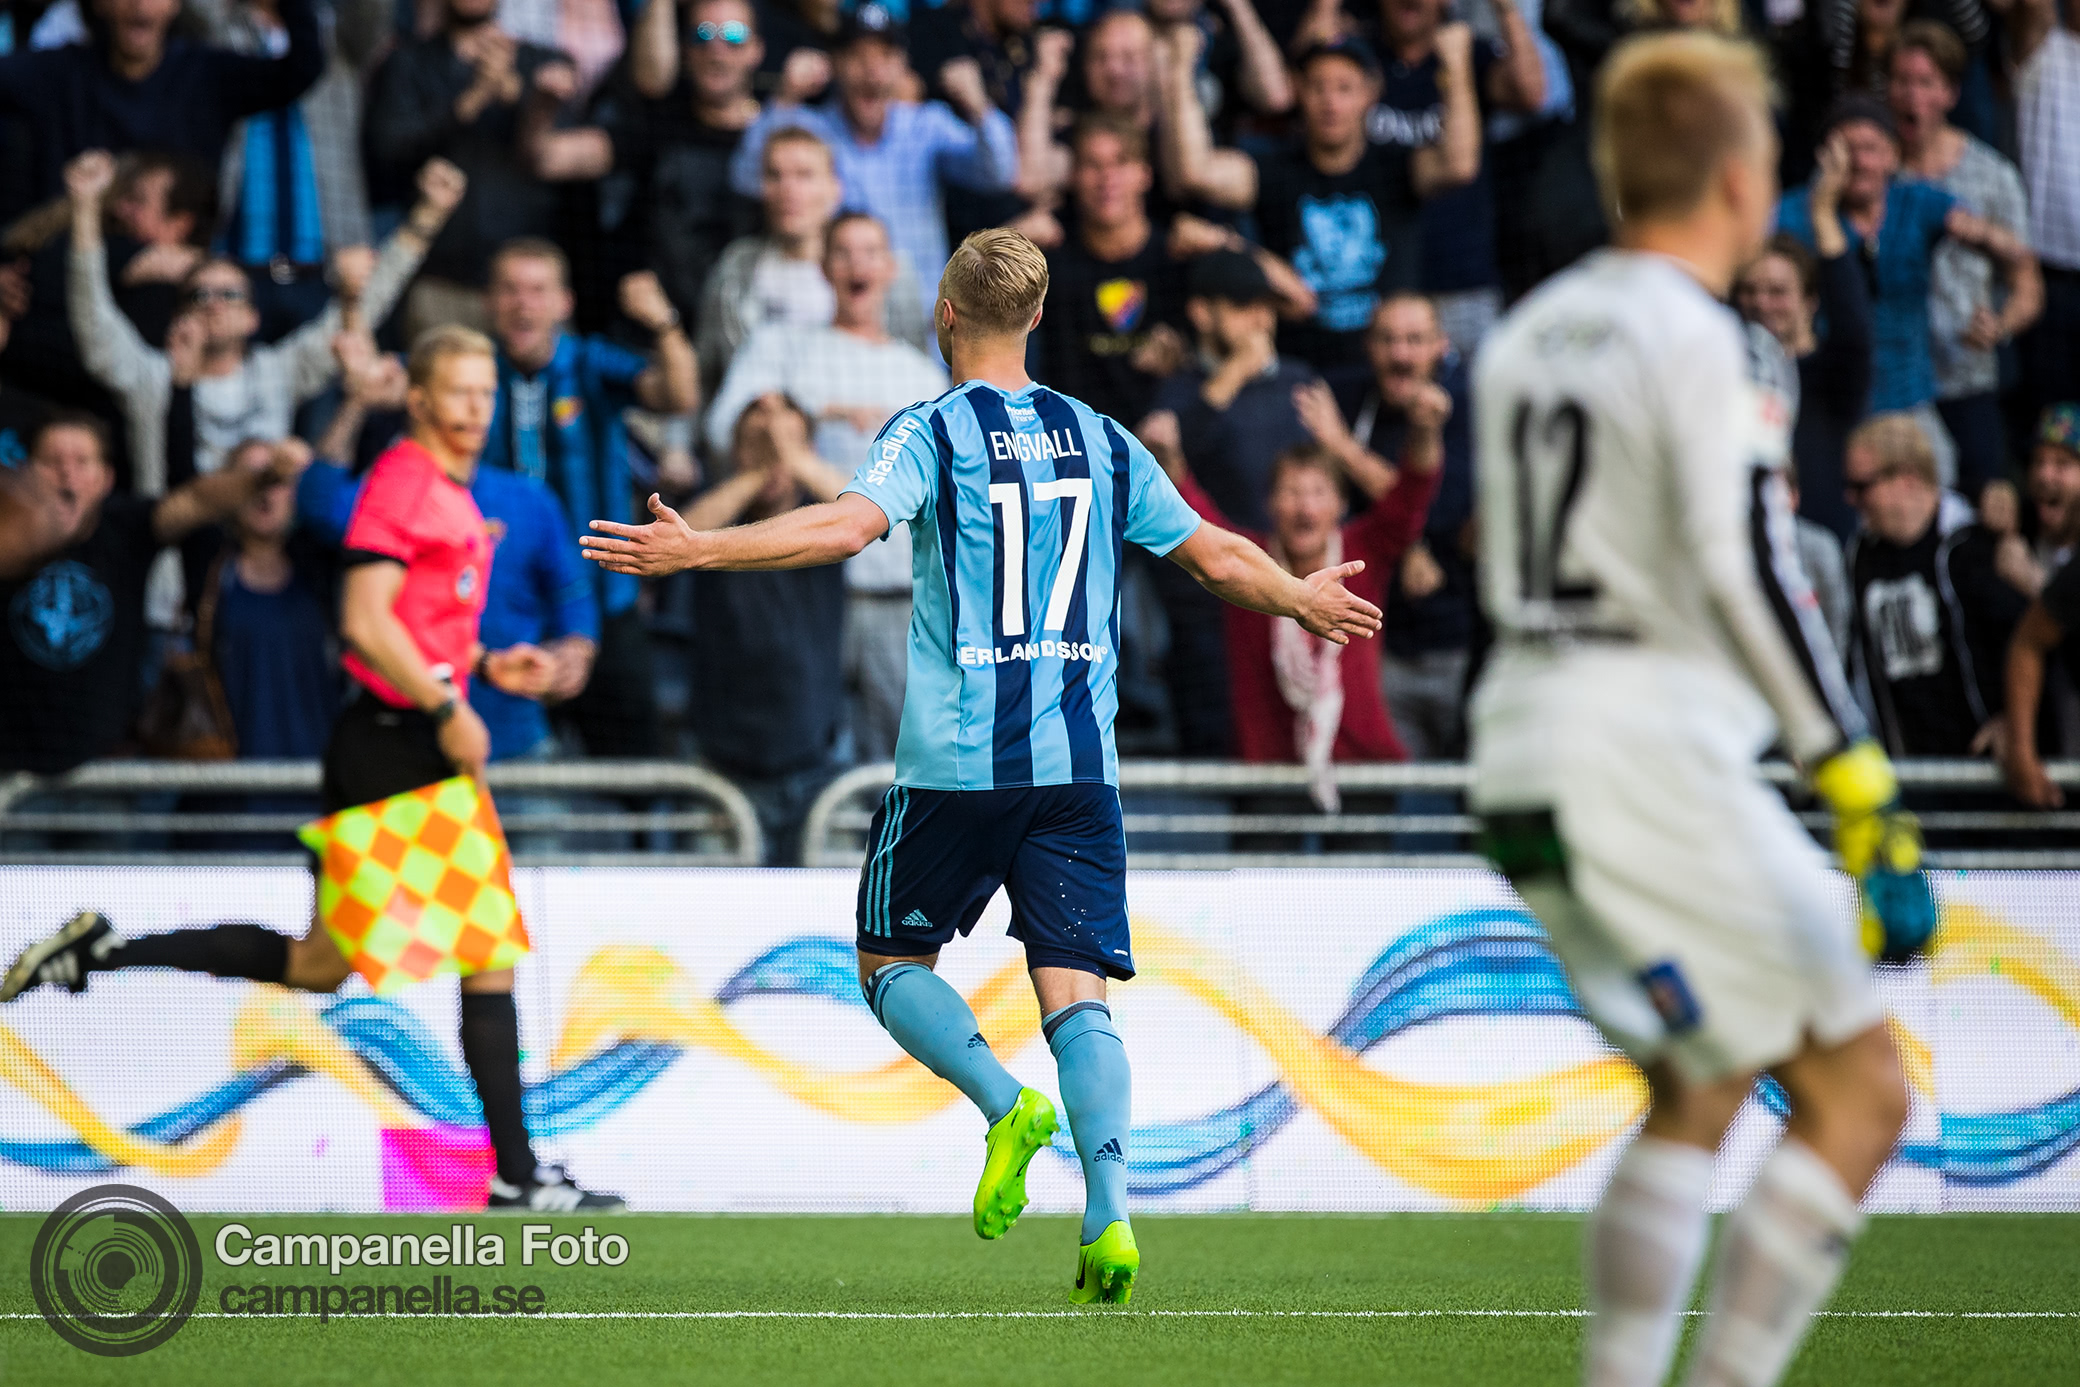 Engvall leads Djurgården to win against Halmstad - Michael Campanella Photography